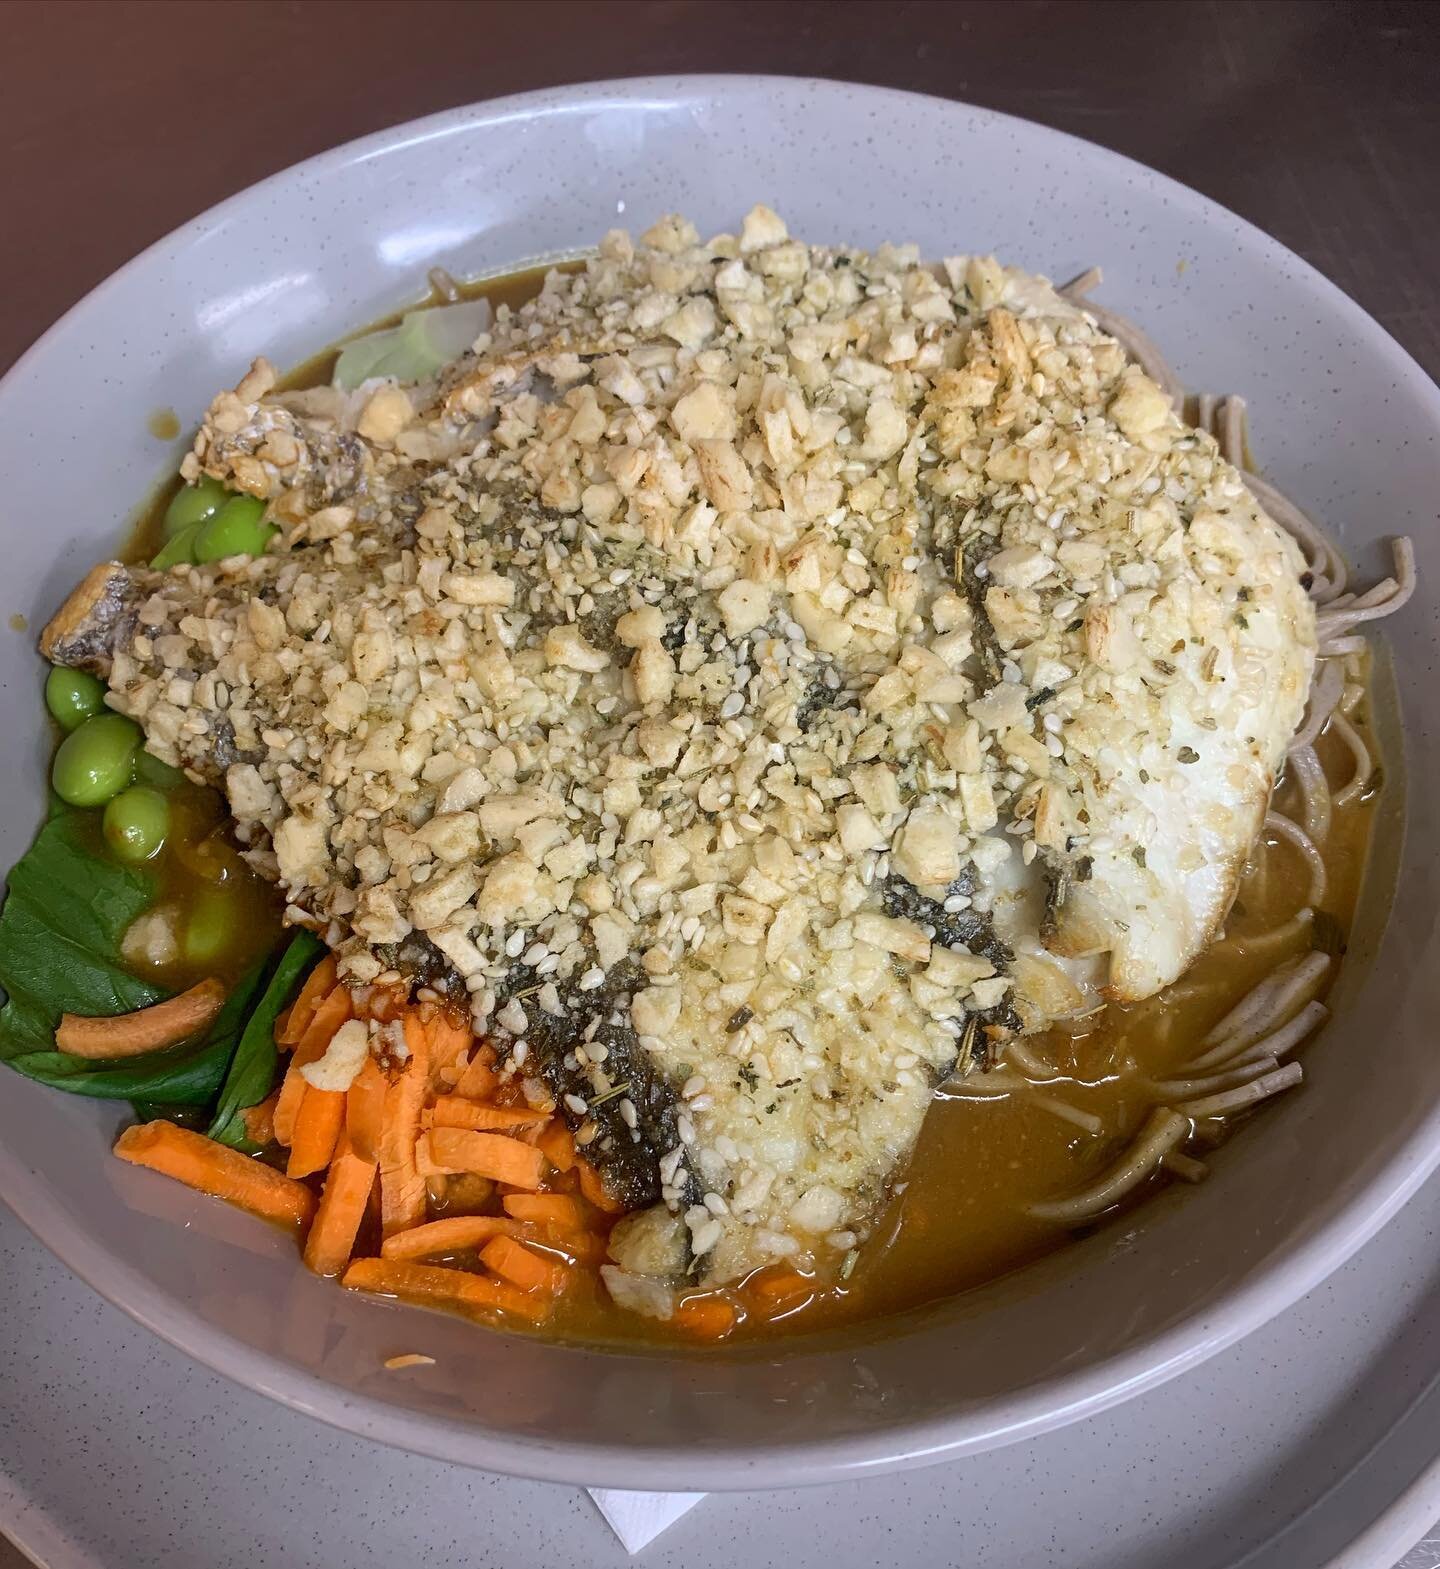 On special while stocks last
Locally caught herb-crusted mulloway in a miso broth with Asian veg 
Thanks to @capecalamari